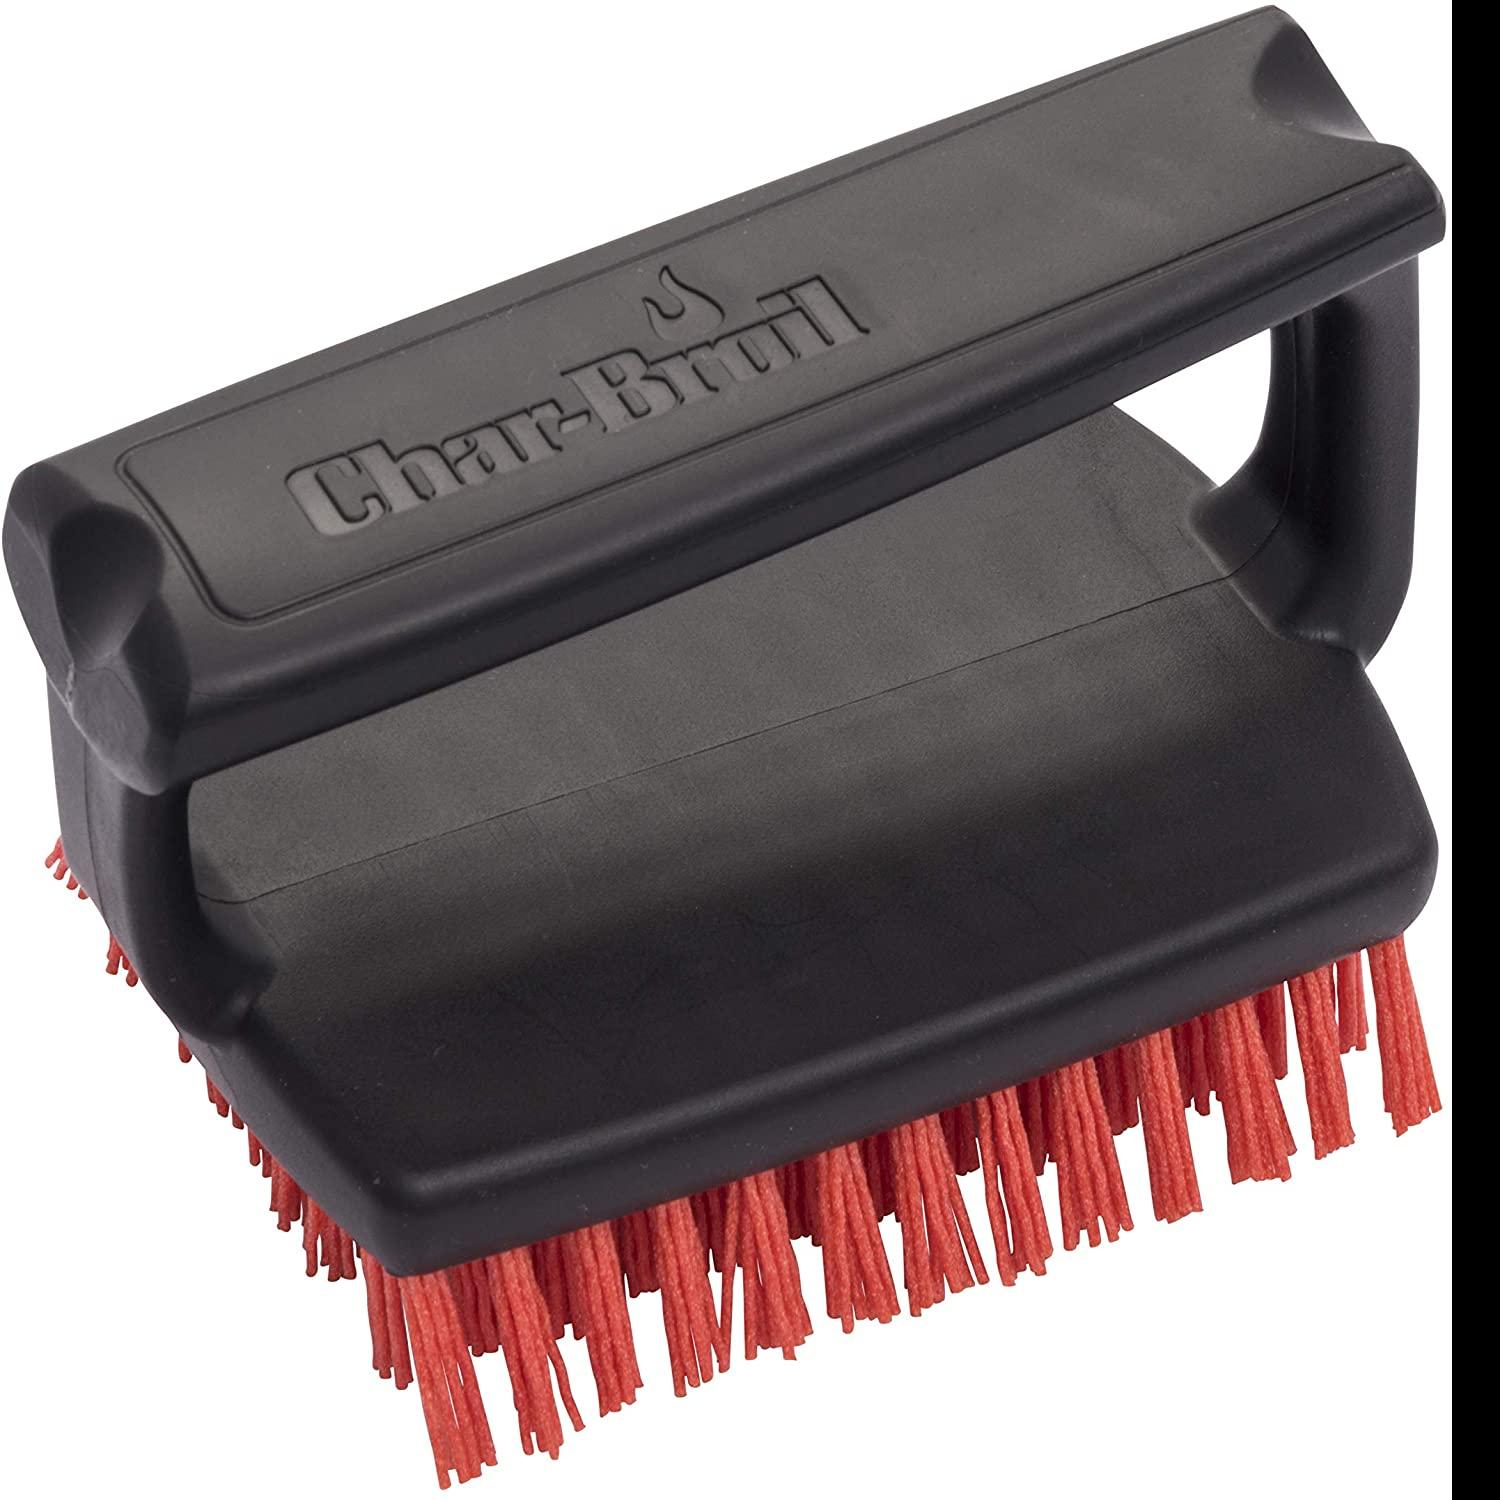 Char-Broil Cool-Clean Handheld Brush for $5.99